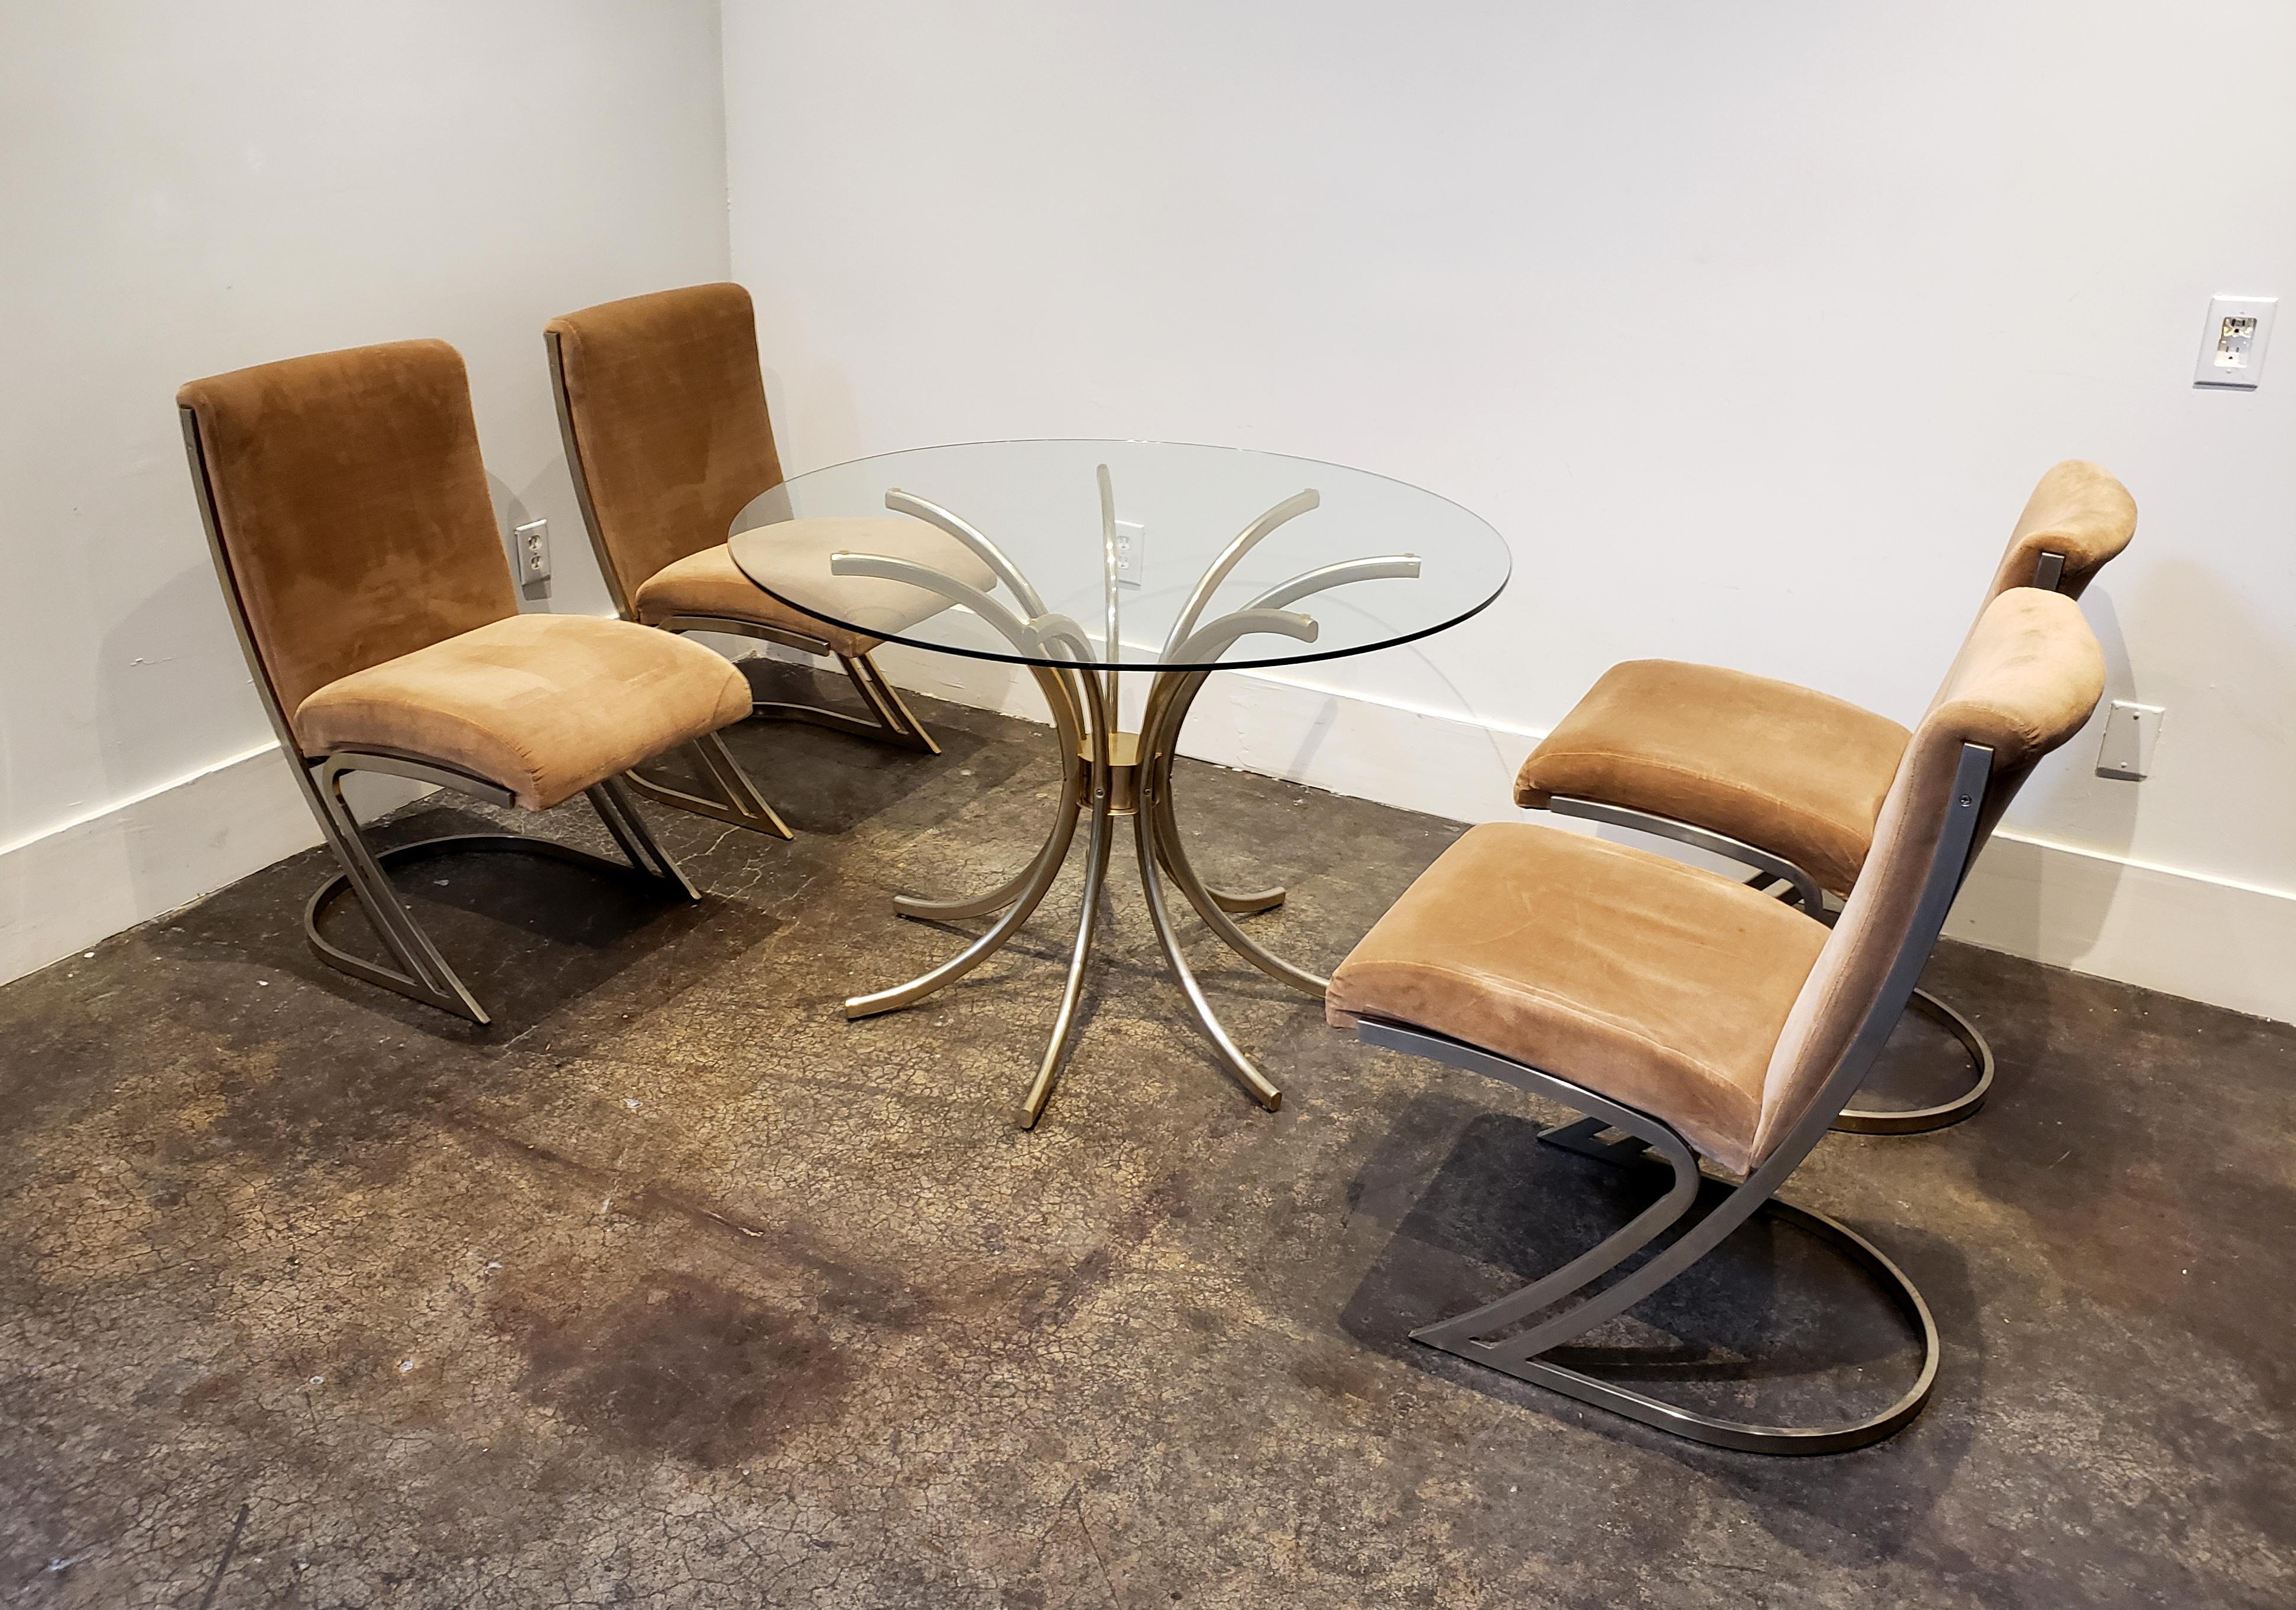 Cardin design manufactured by Basset Furniture in 1975. Dining table is a modern take on the traditional wheat shaft design, comprised of 7 curved, C-shape oval tubes attached to a central cylinder. Chairs are a sweeping z-form frame with